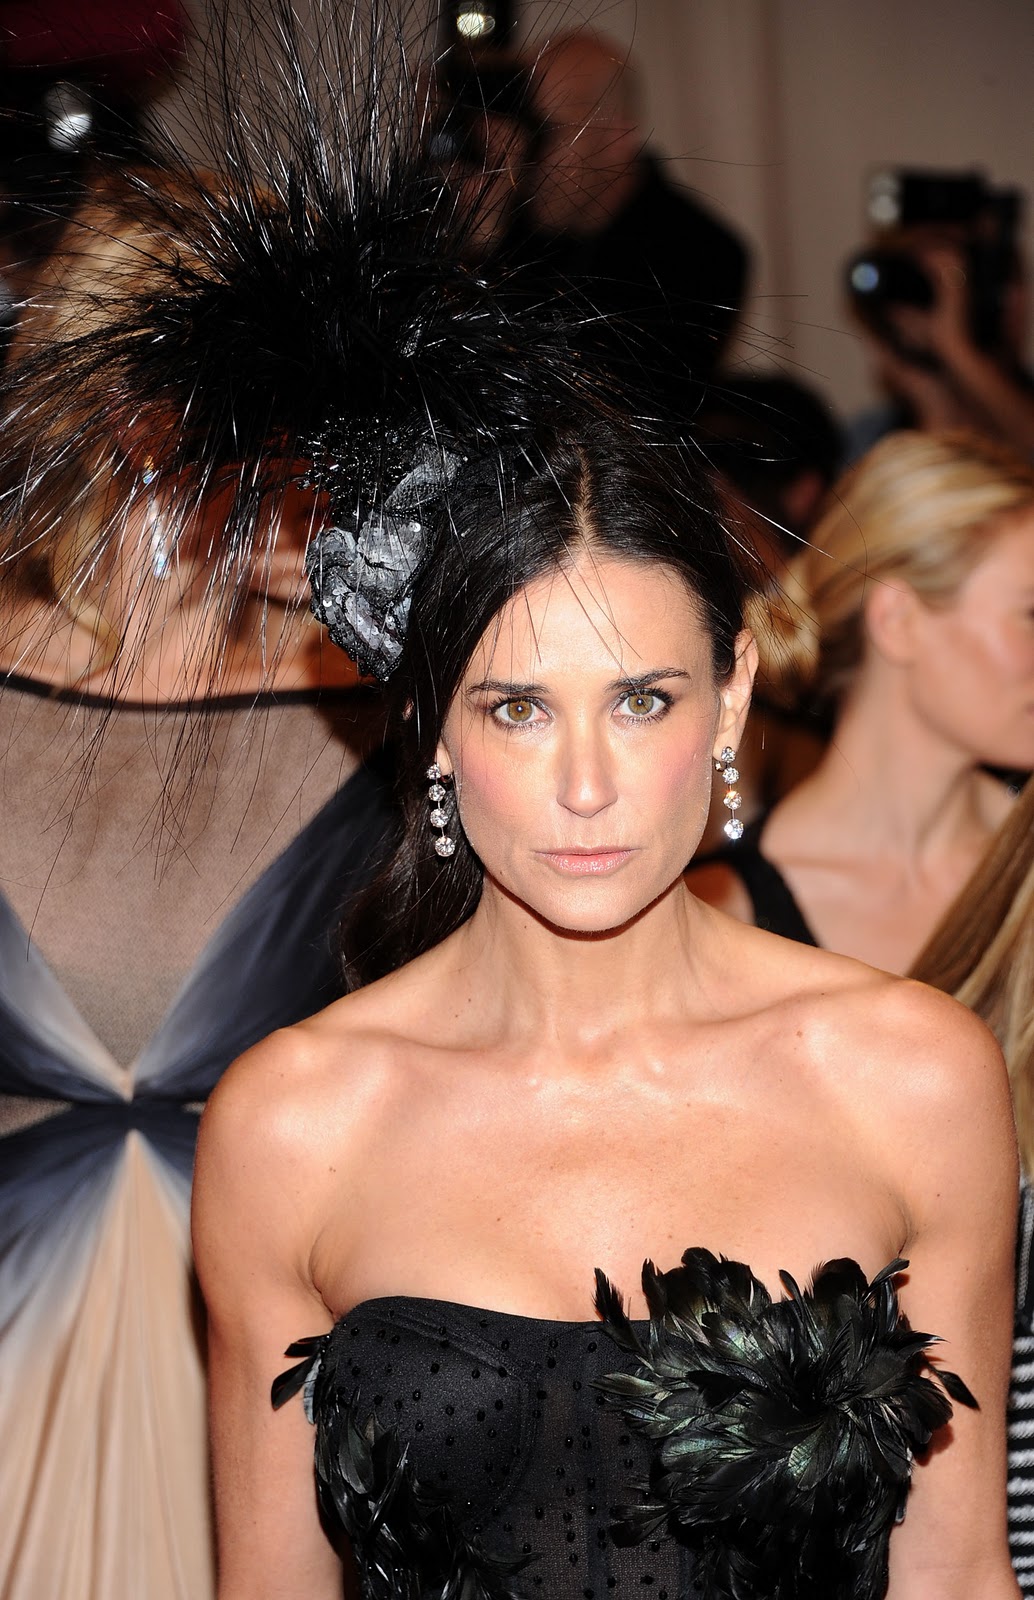 http://4.bp.blogspot.com/-40yvAs-vDr4/ToQqrbyjhGI/AAAAAAAAAls/wx9D7Xm9qI8/s1600/Demi-Moore-pics-photos-images-actress-hairstyle-movies-songs+3.jpg